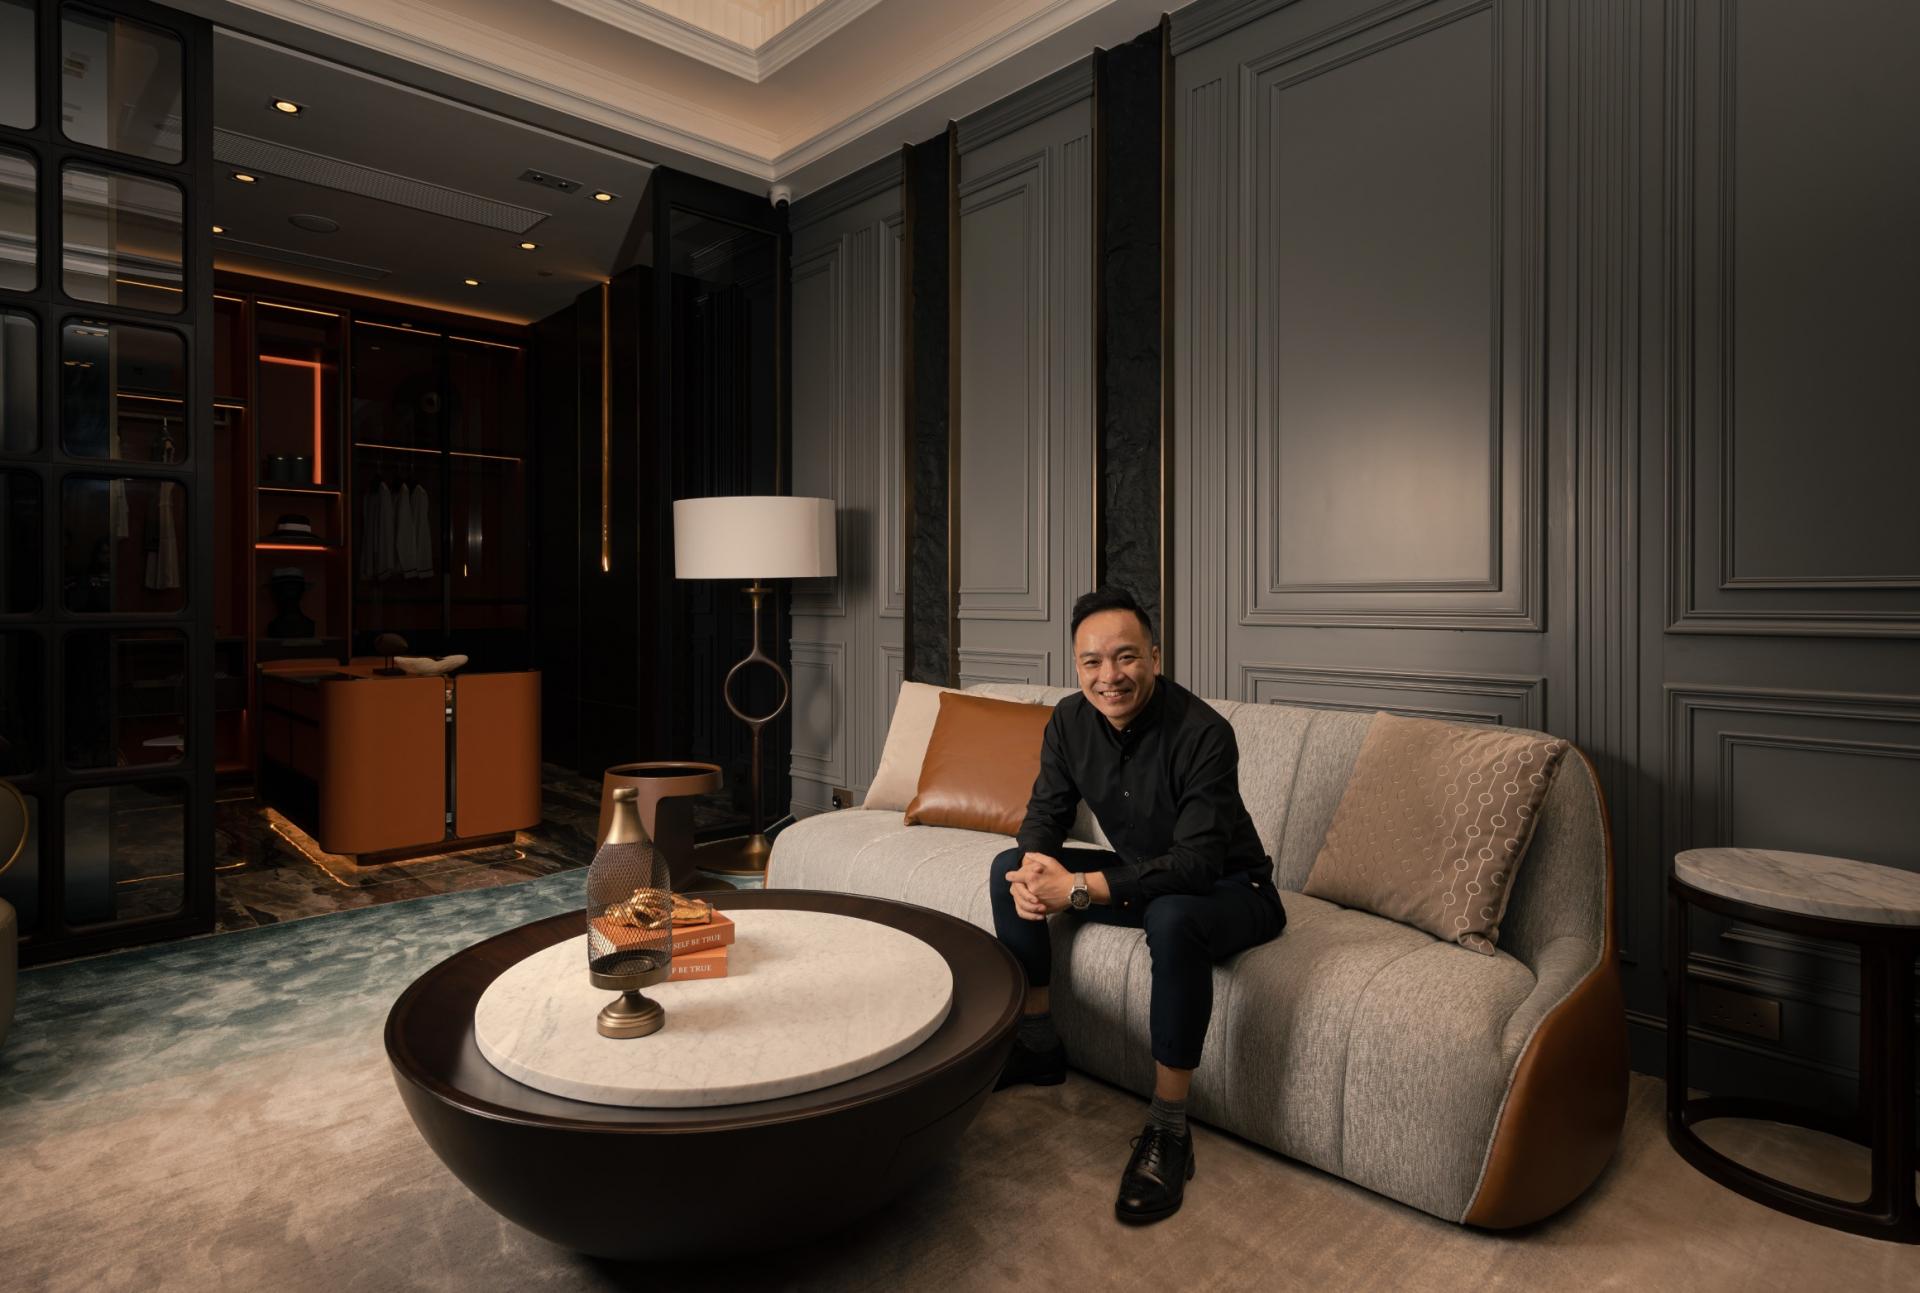 Hei Design founder Chris Lau takes us inside the firm's impressive new location